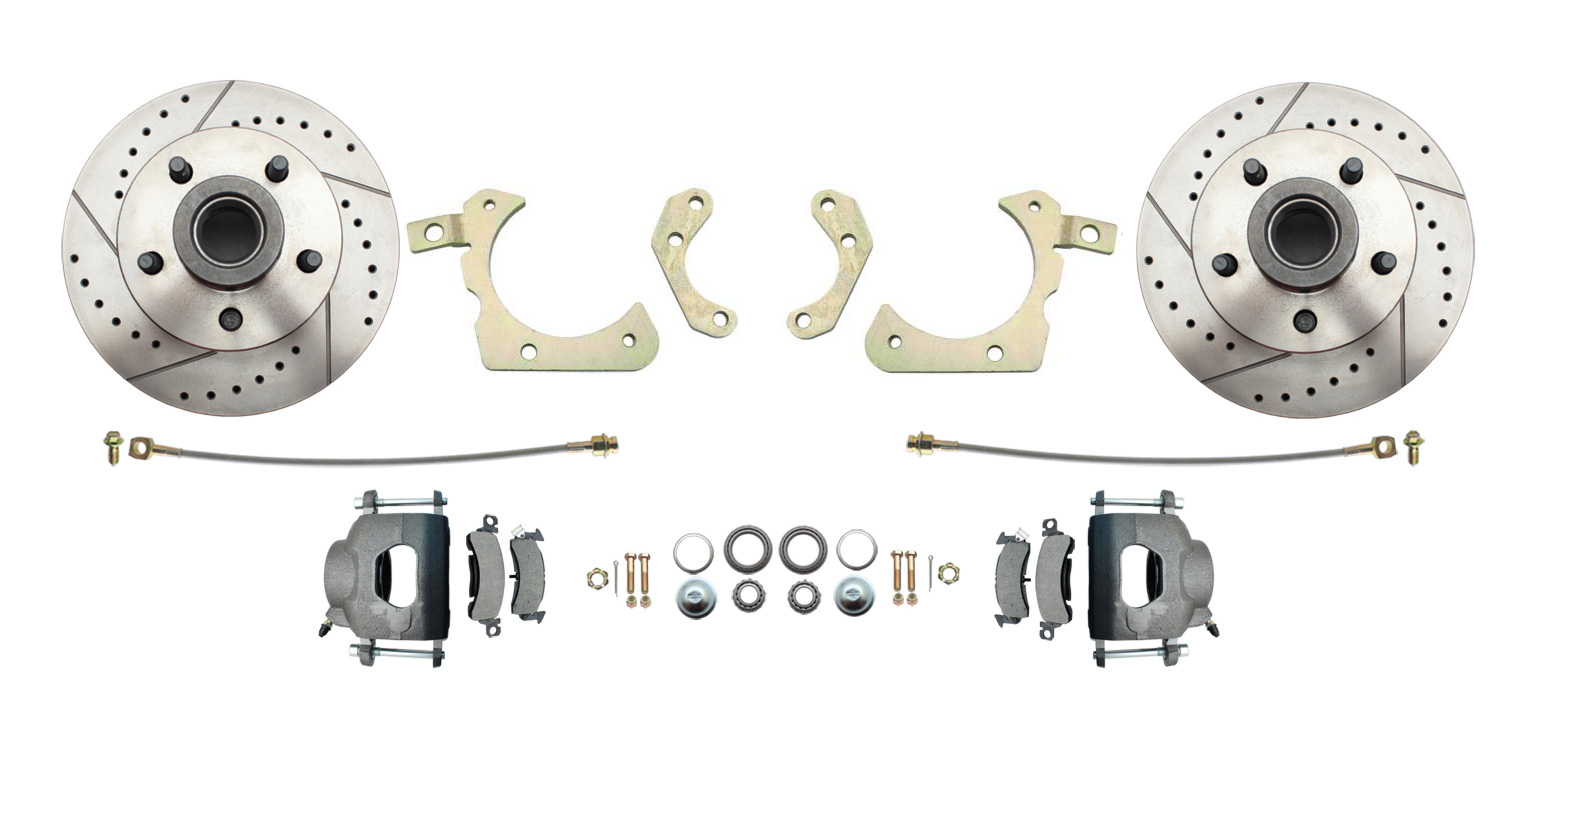 1959-1964 GM Full Size Disc Brake Conversion Kit W/ Drilled/ Slotted Rotors (Impala, Bel Air, Biscayne)